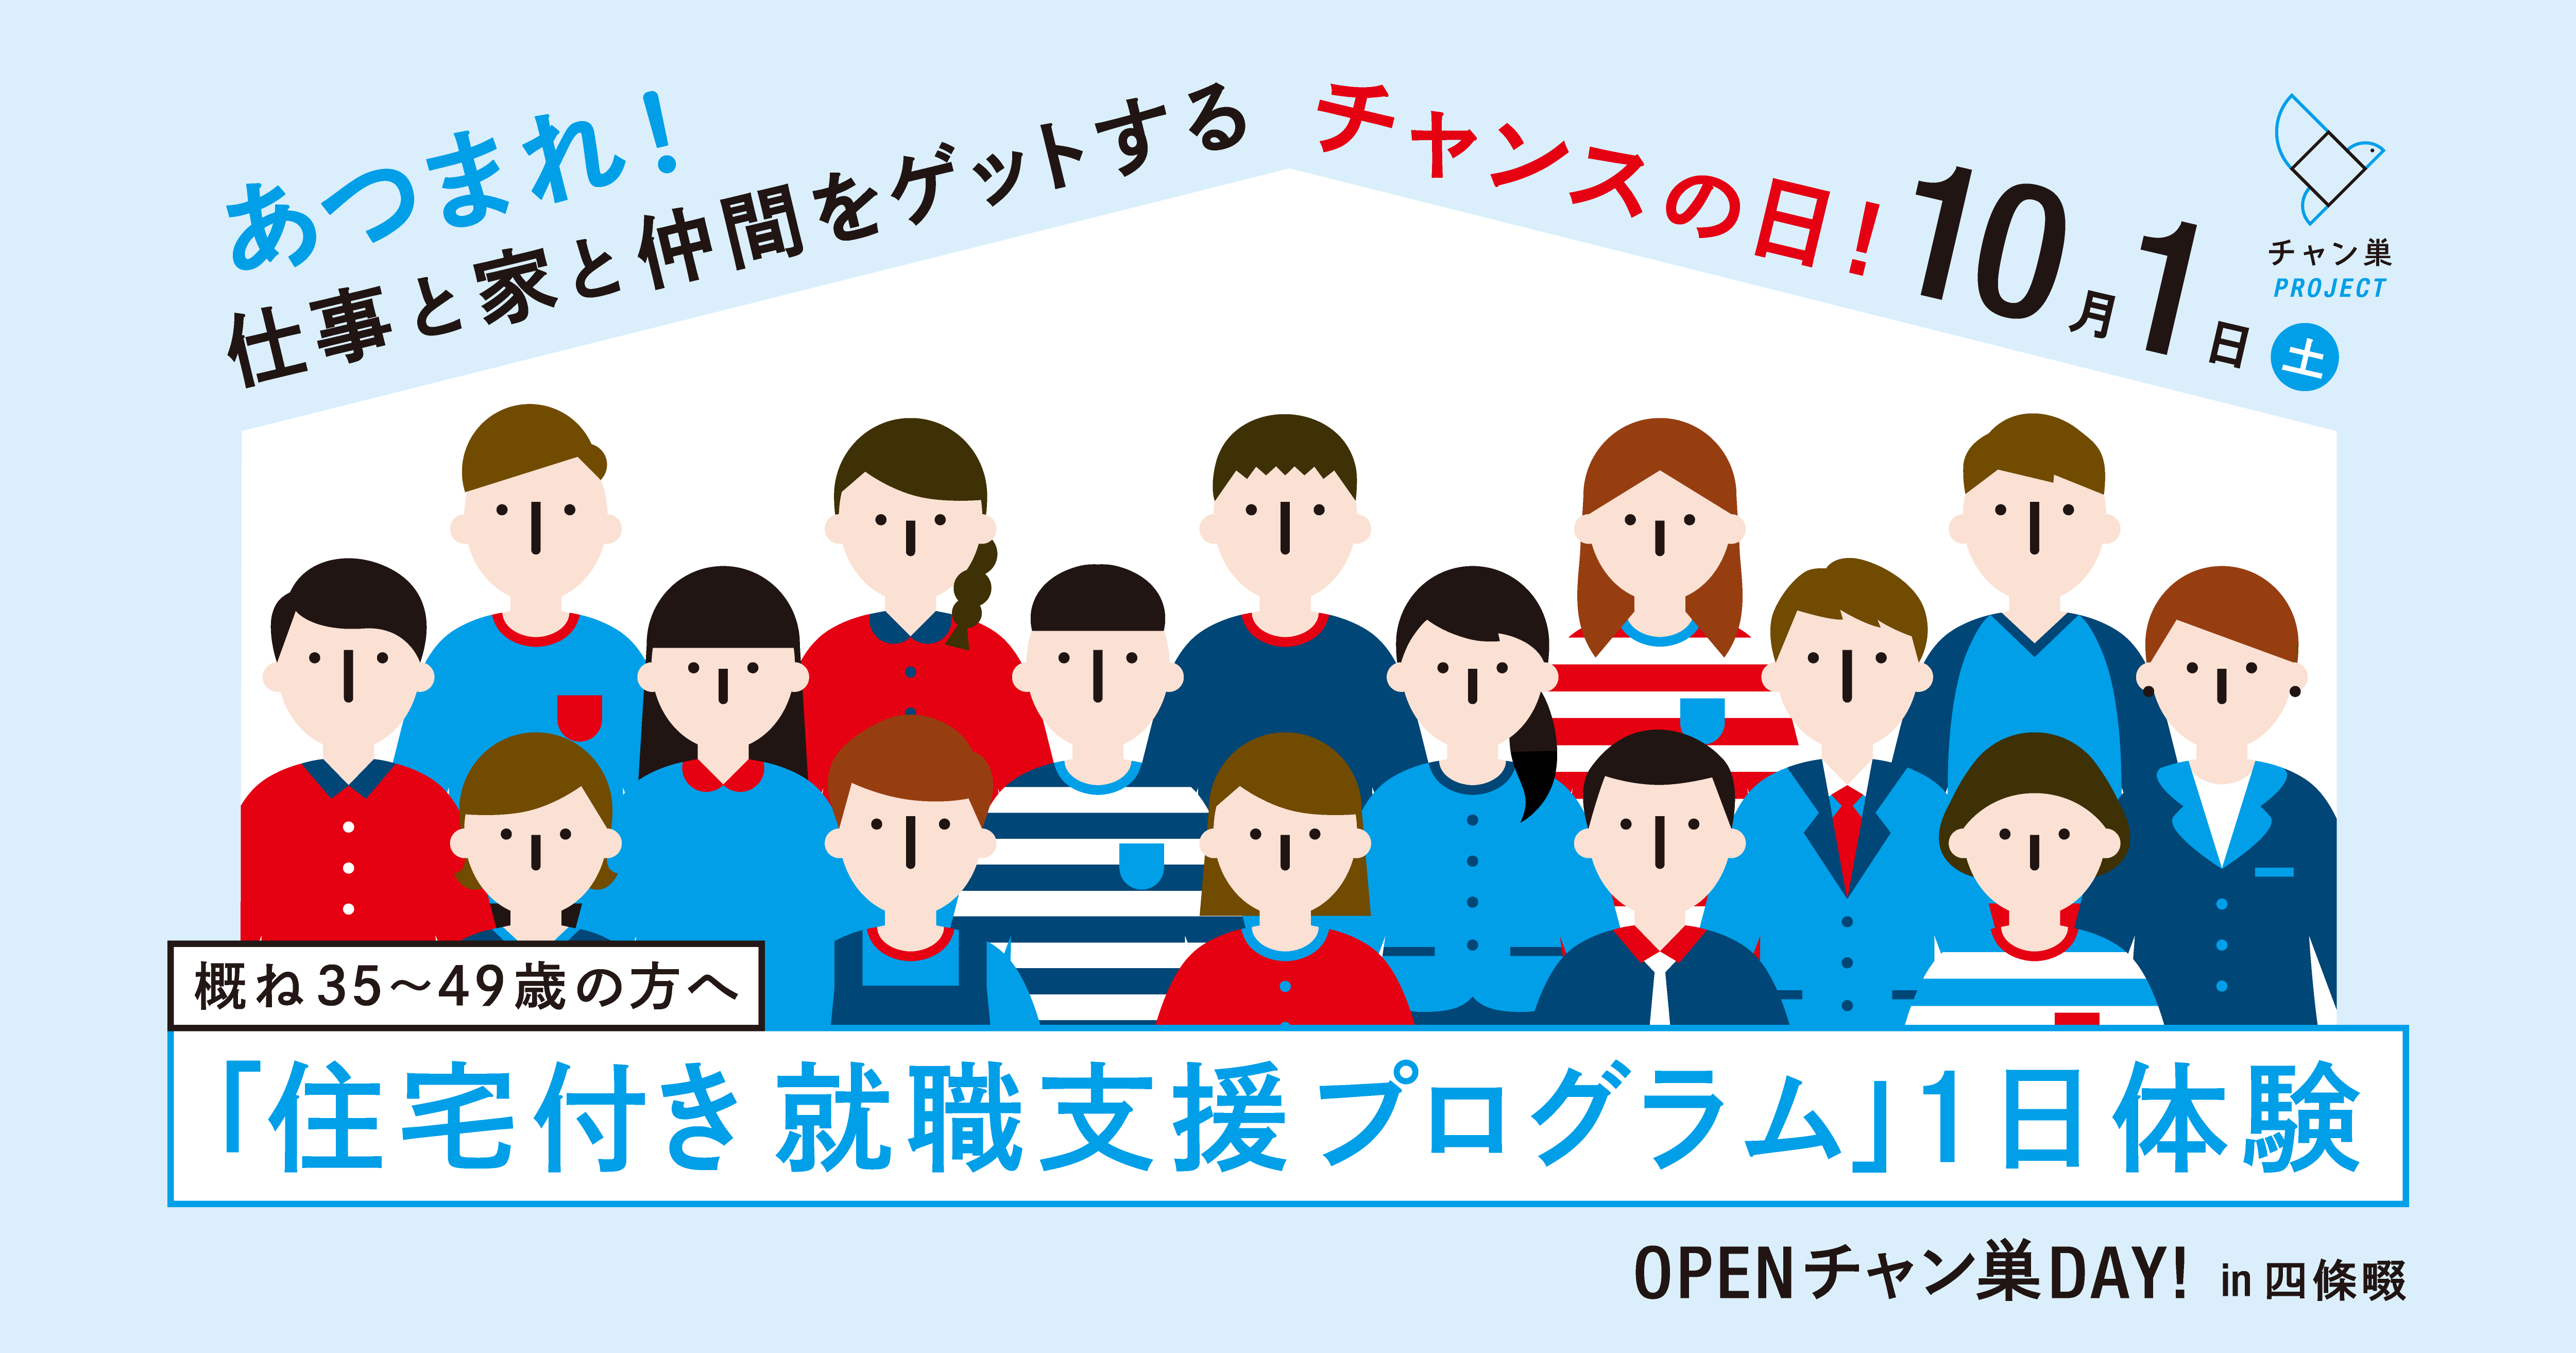 OPENチャン巣DAY!